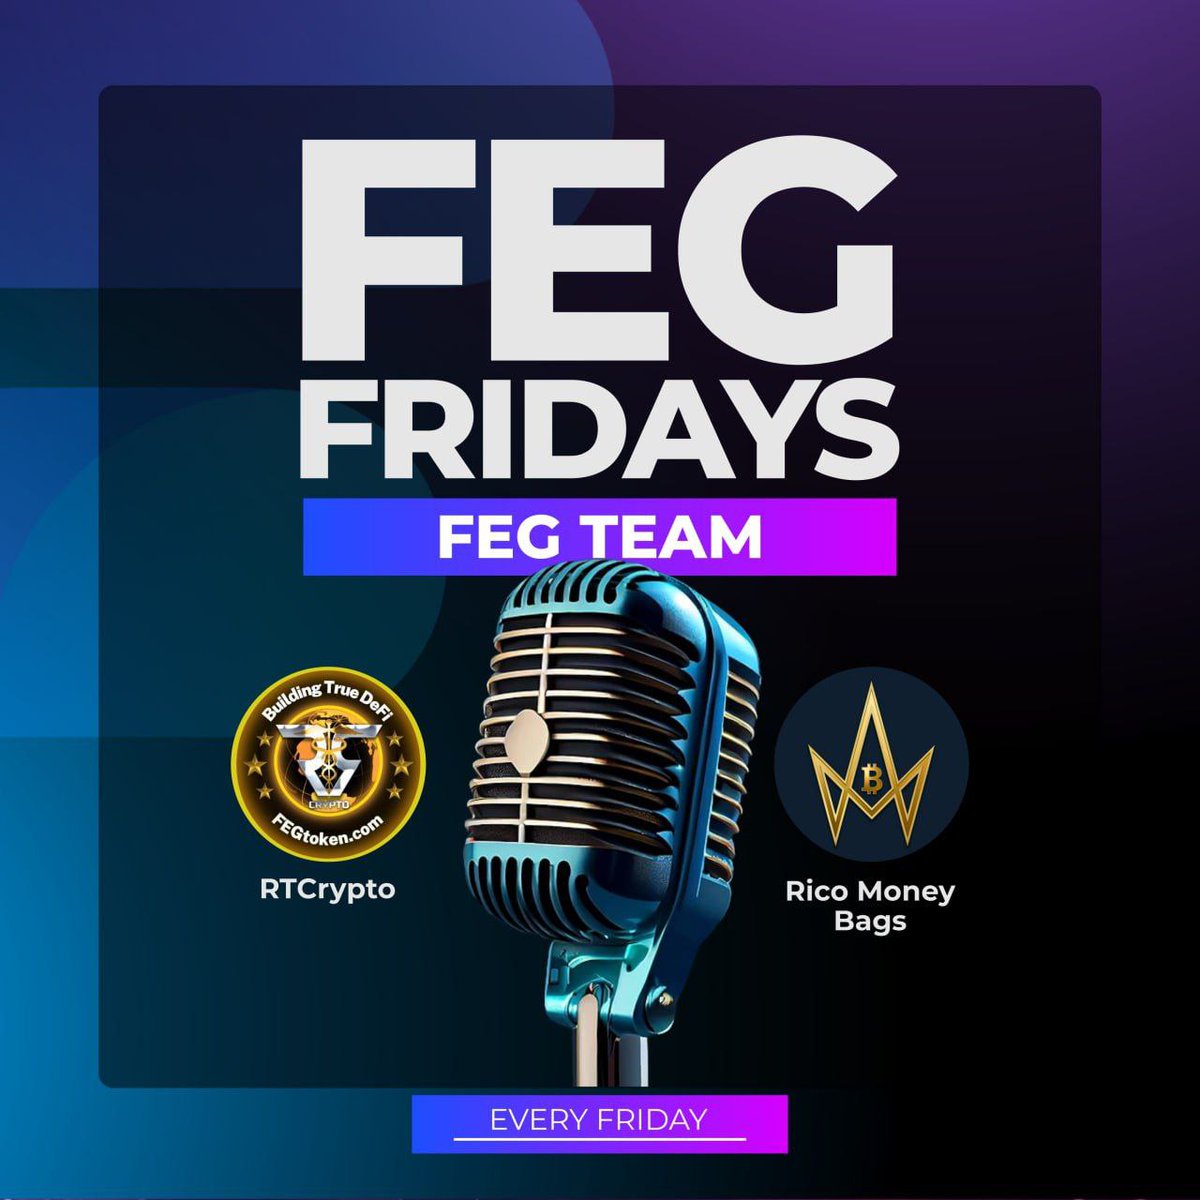 🔊 Missed #FEGfriday live with @RTRcrypto & @RicoMoneyBags 🎧twitter.com/i/spaces/1vAxR… 📣 Topics! ✅️ #Bitcoin ✅️ #DeFi ✅️ #FEGtoken ✅️ #SmartDeFi Token Launchpad ✅️ #Marketing ✅️ #RWAtokenization ✅️ & more - it was action-packed! 🚀 👋 See you next Friday!